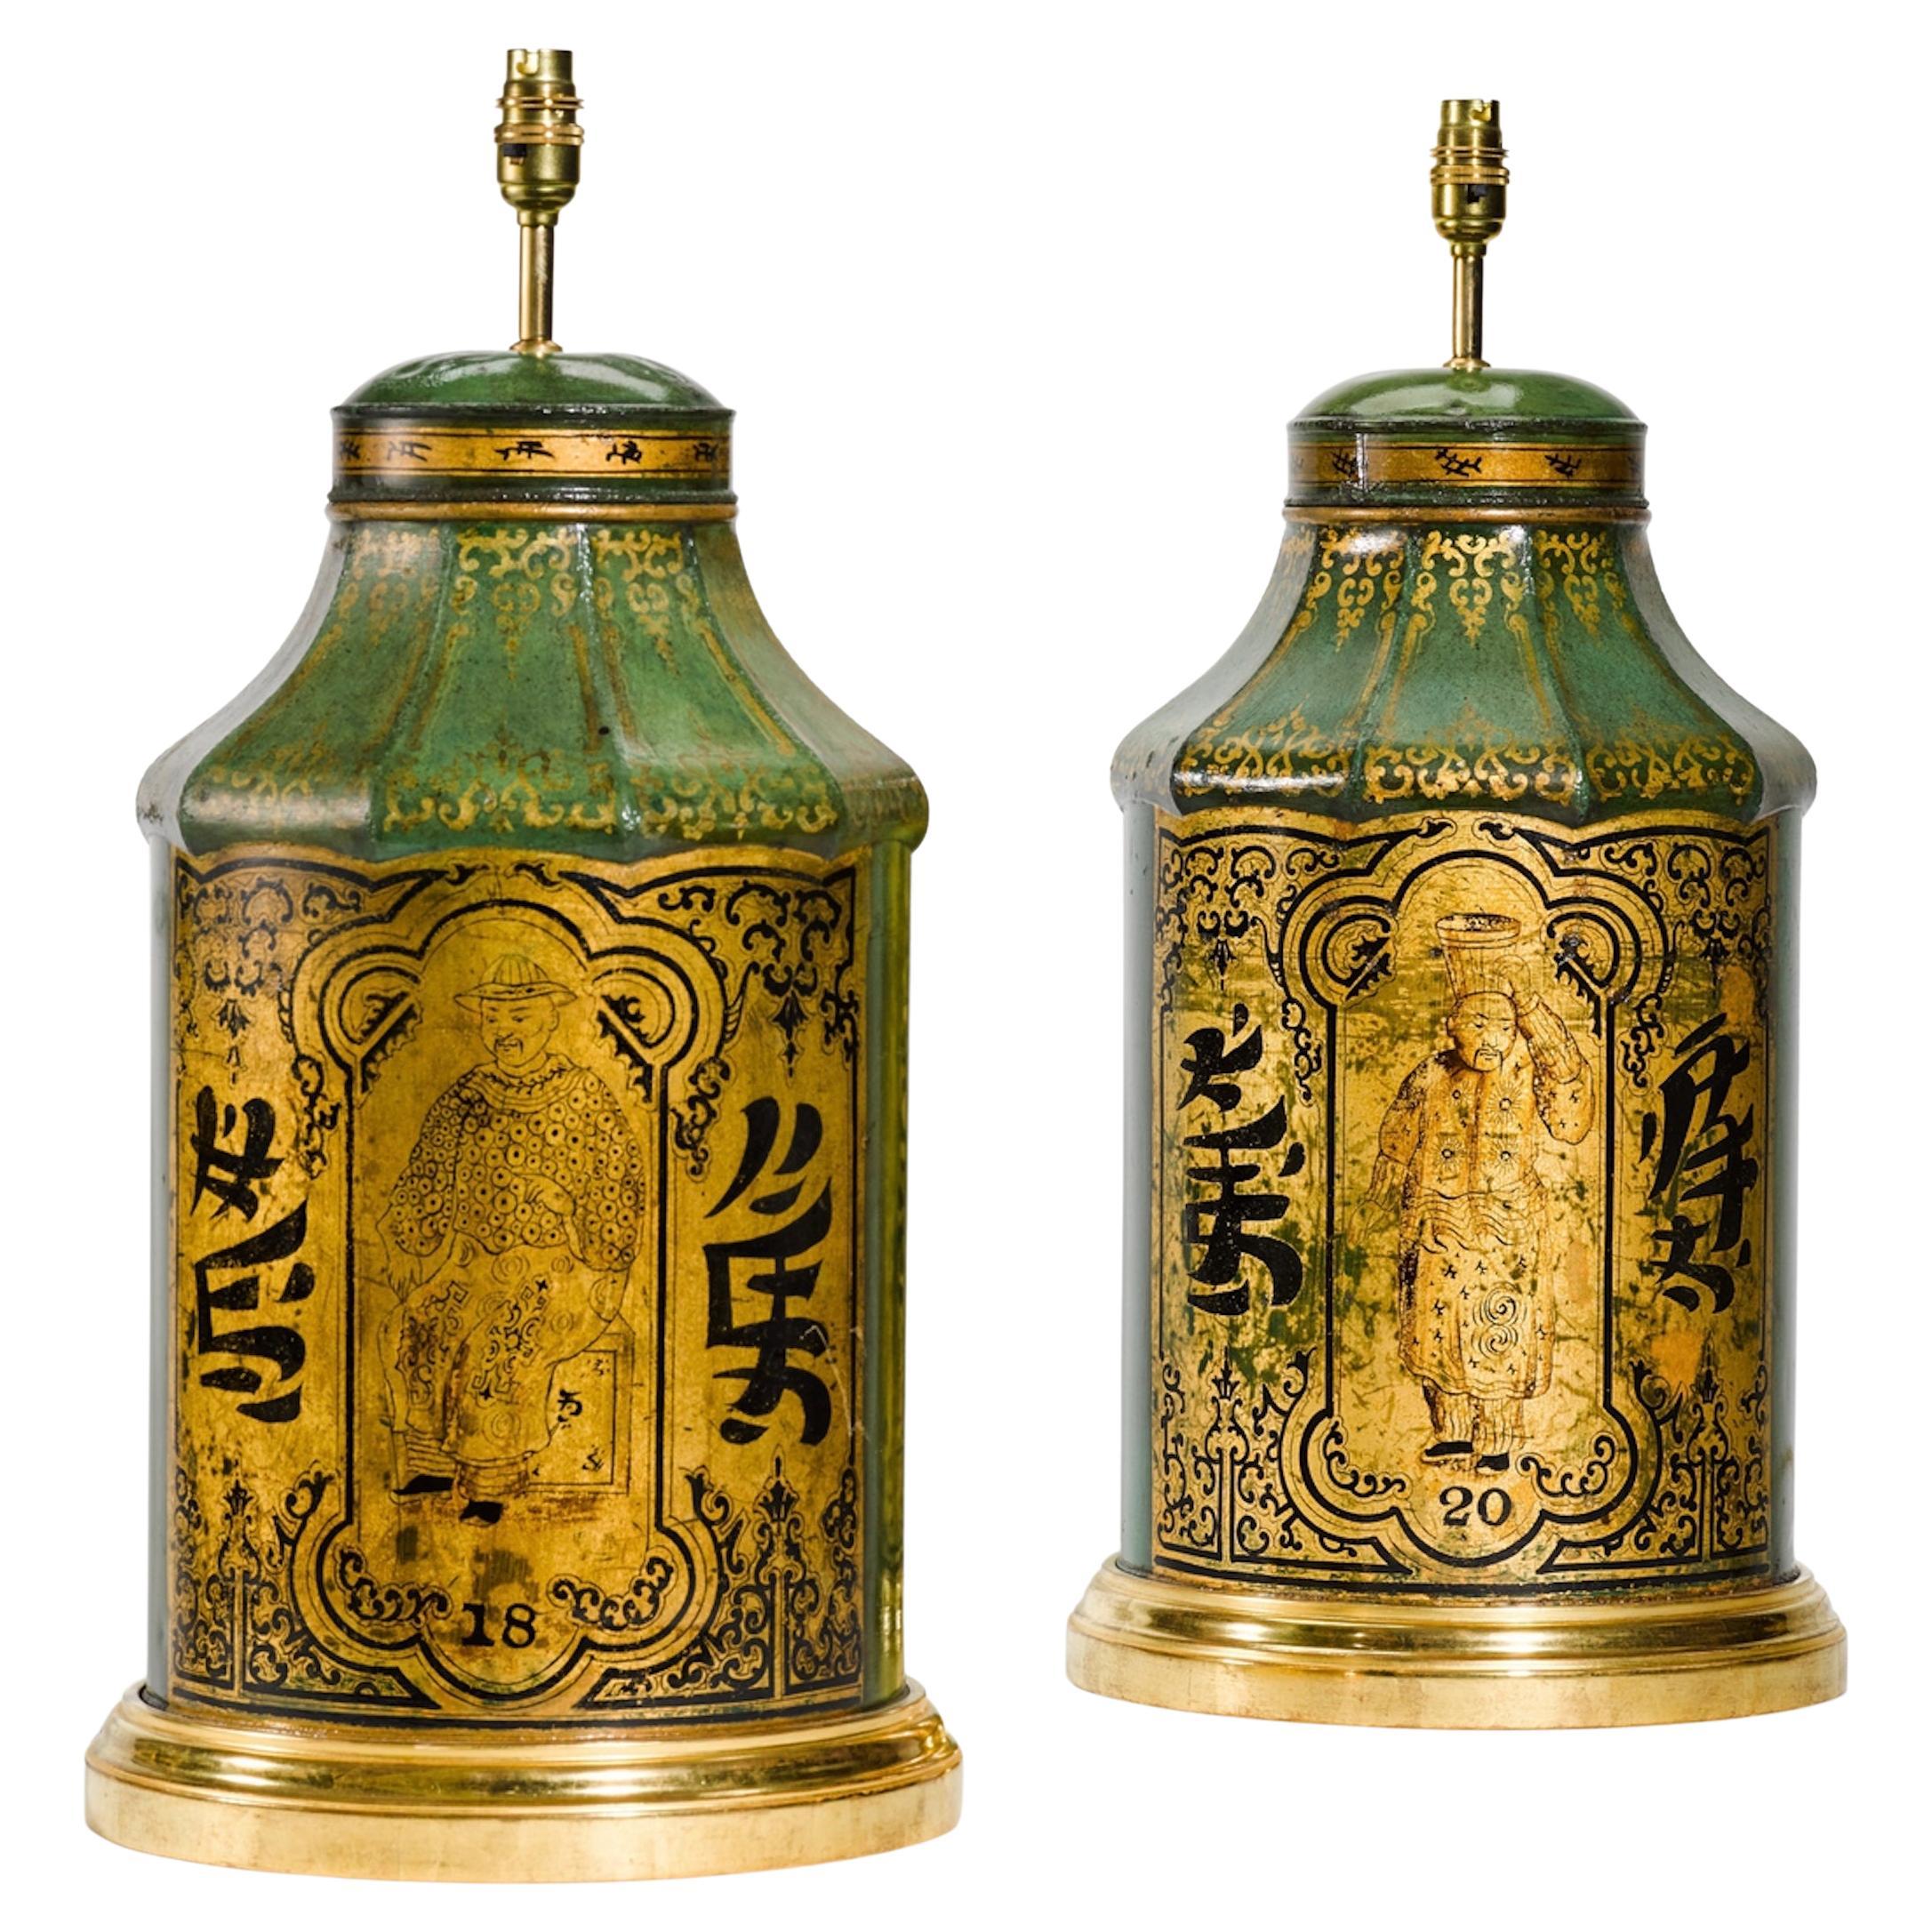 Pair of Gold and Green 19th Century Tea Canister Antique Table Lamps For Sale